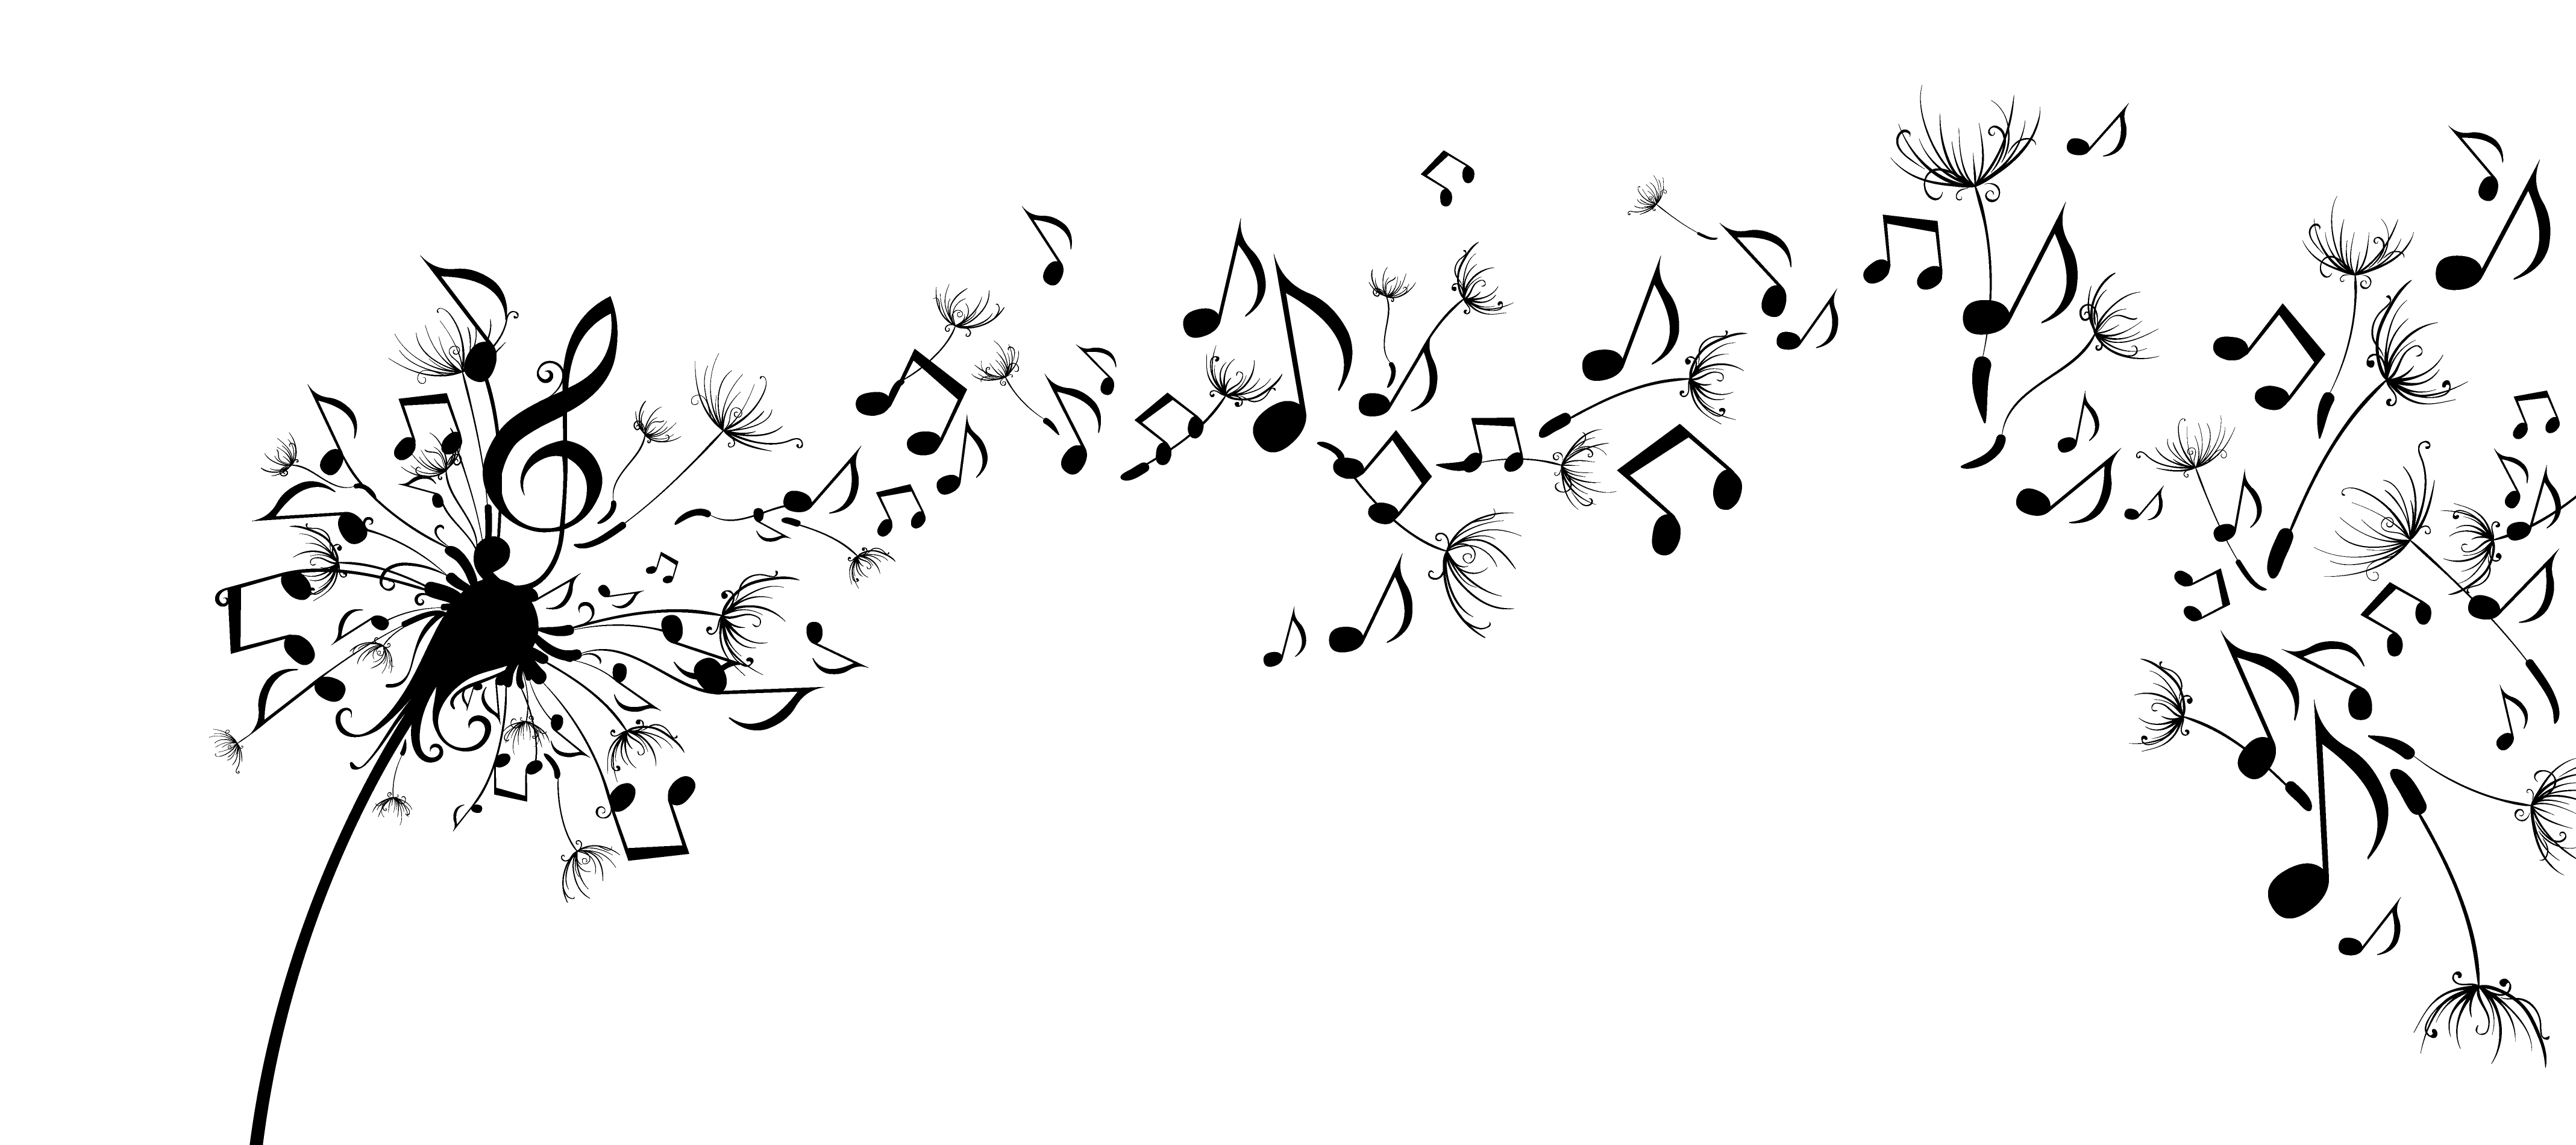 Music Notes PNG HD - 148660